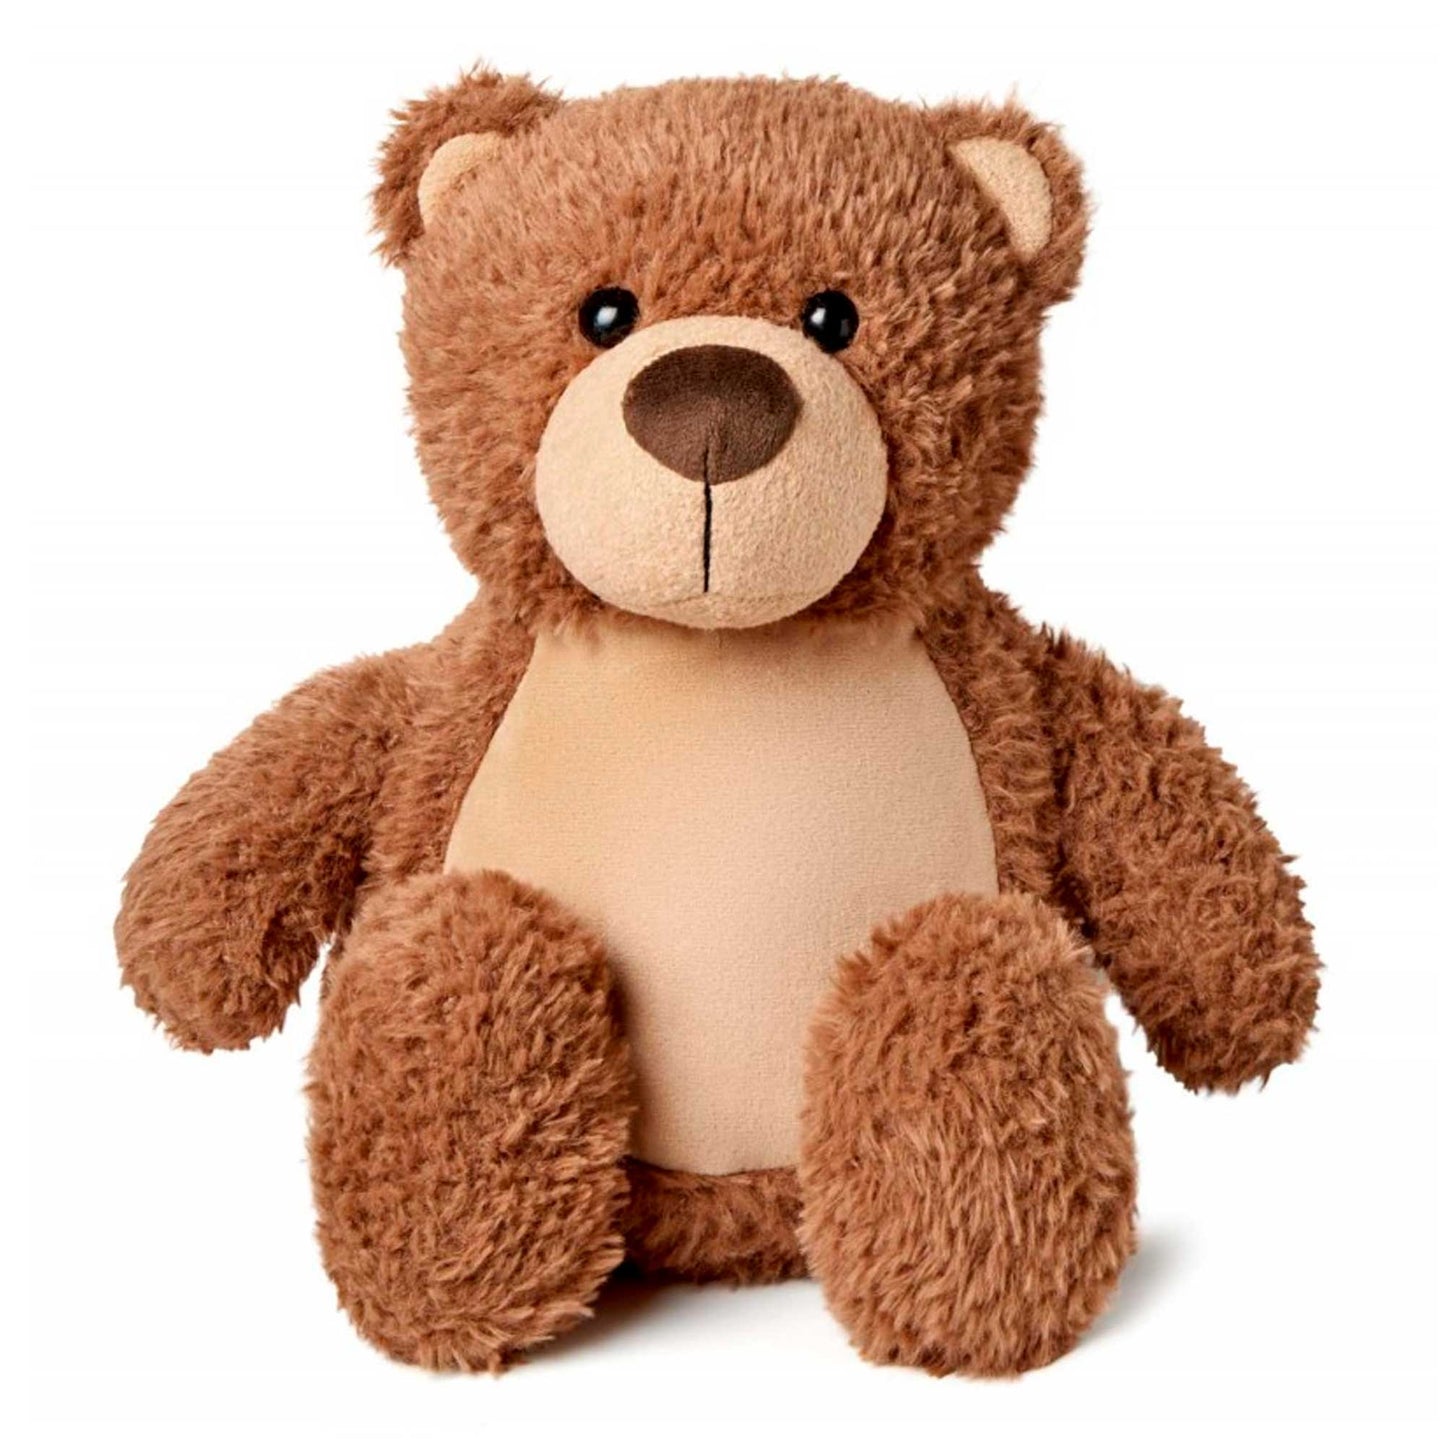 Personalised Record-A-Voice Teddy Bear - Brown